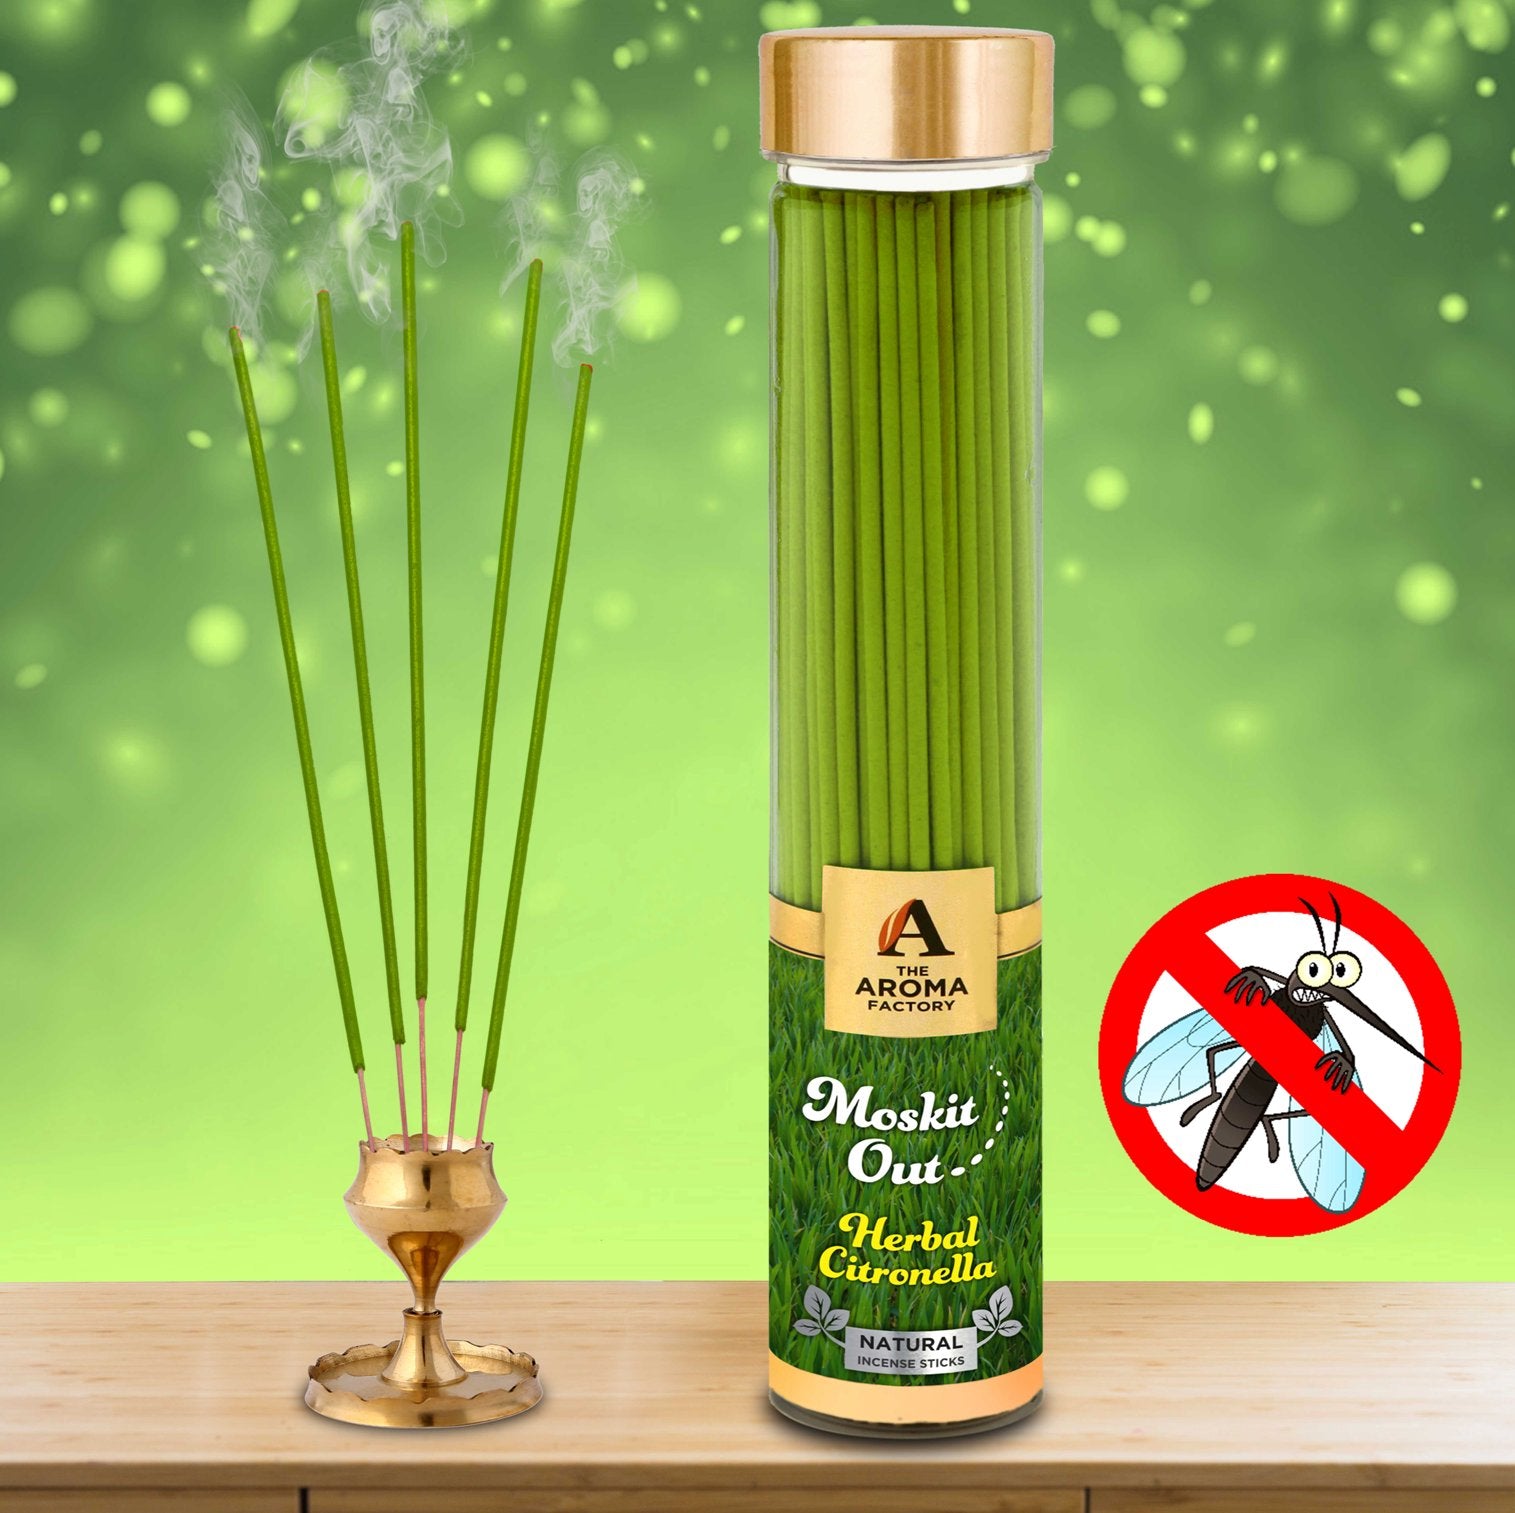 The Aroma Factory Moskit Out Citronella Incense Sticks Agarbatti (Charcoal Free & 100% Herbal) Bottle, 100g